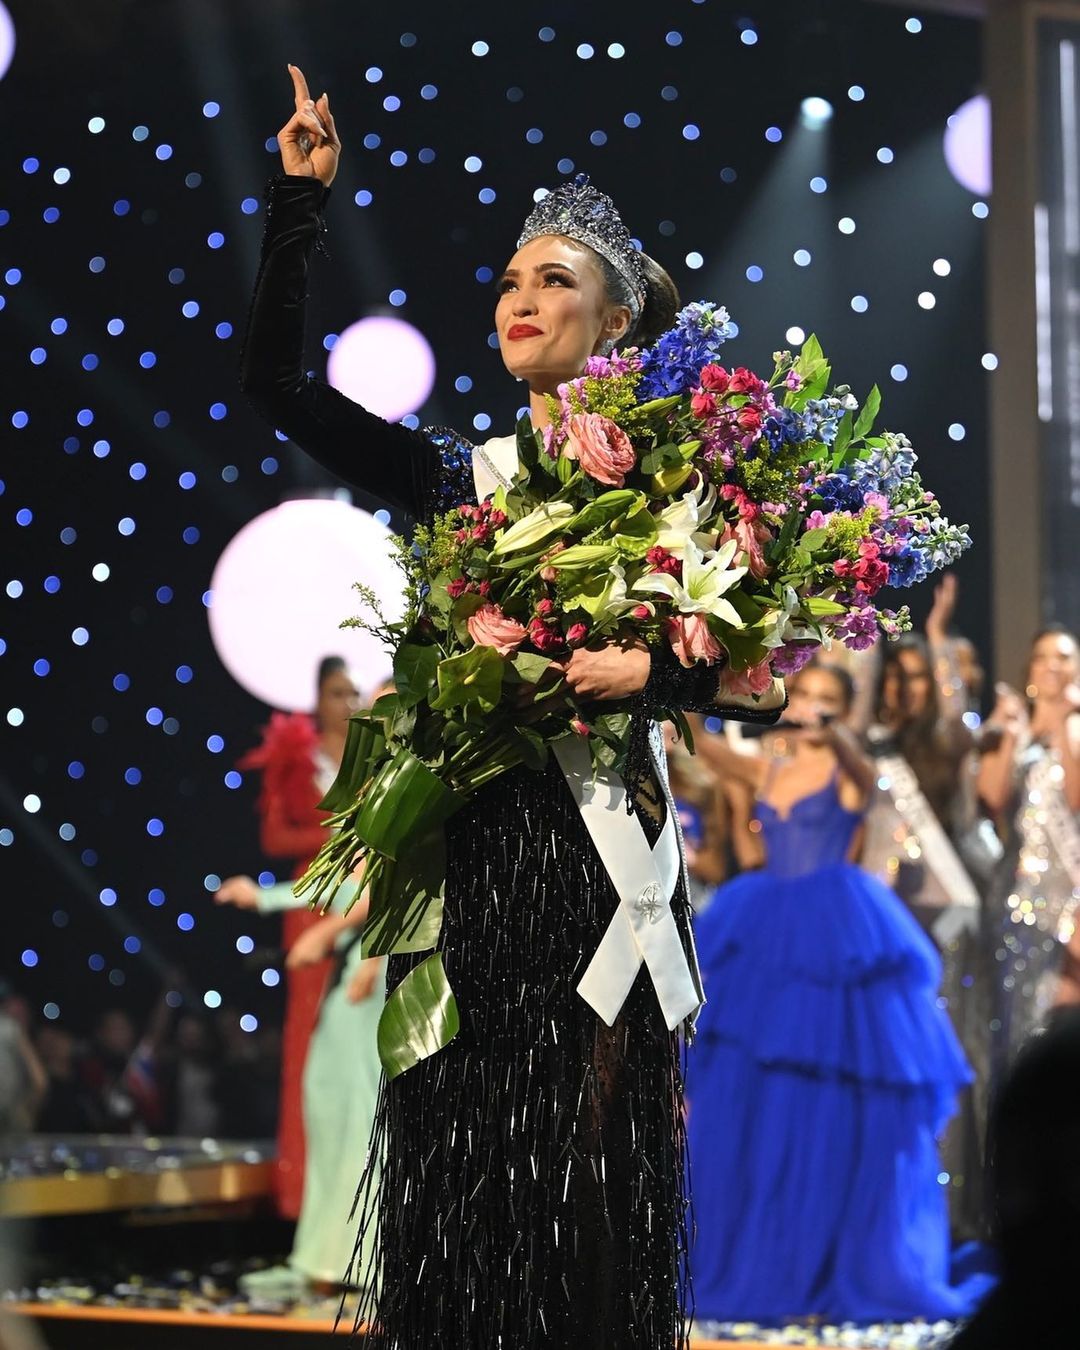 Filipino Designers Reveal What Makes a Winning Miss Universe Gown